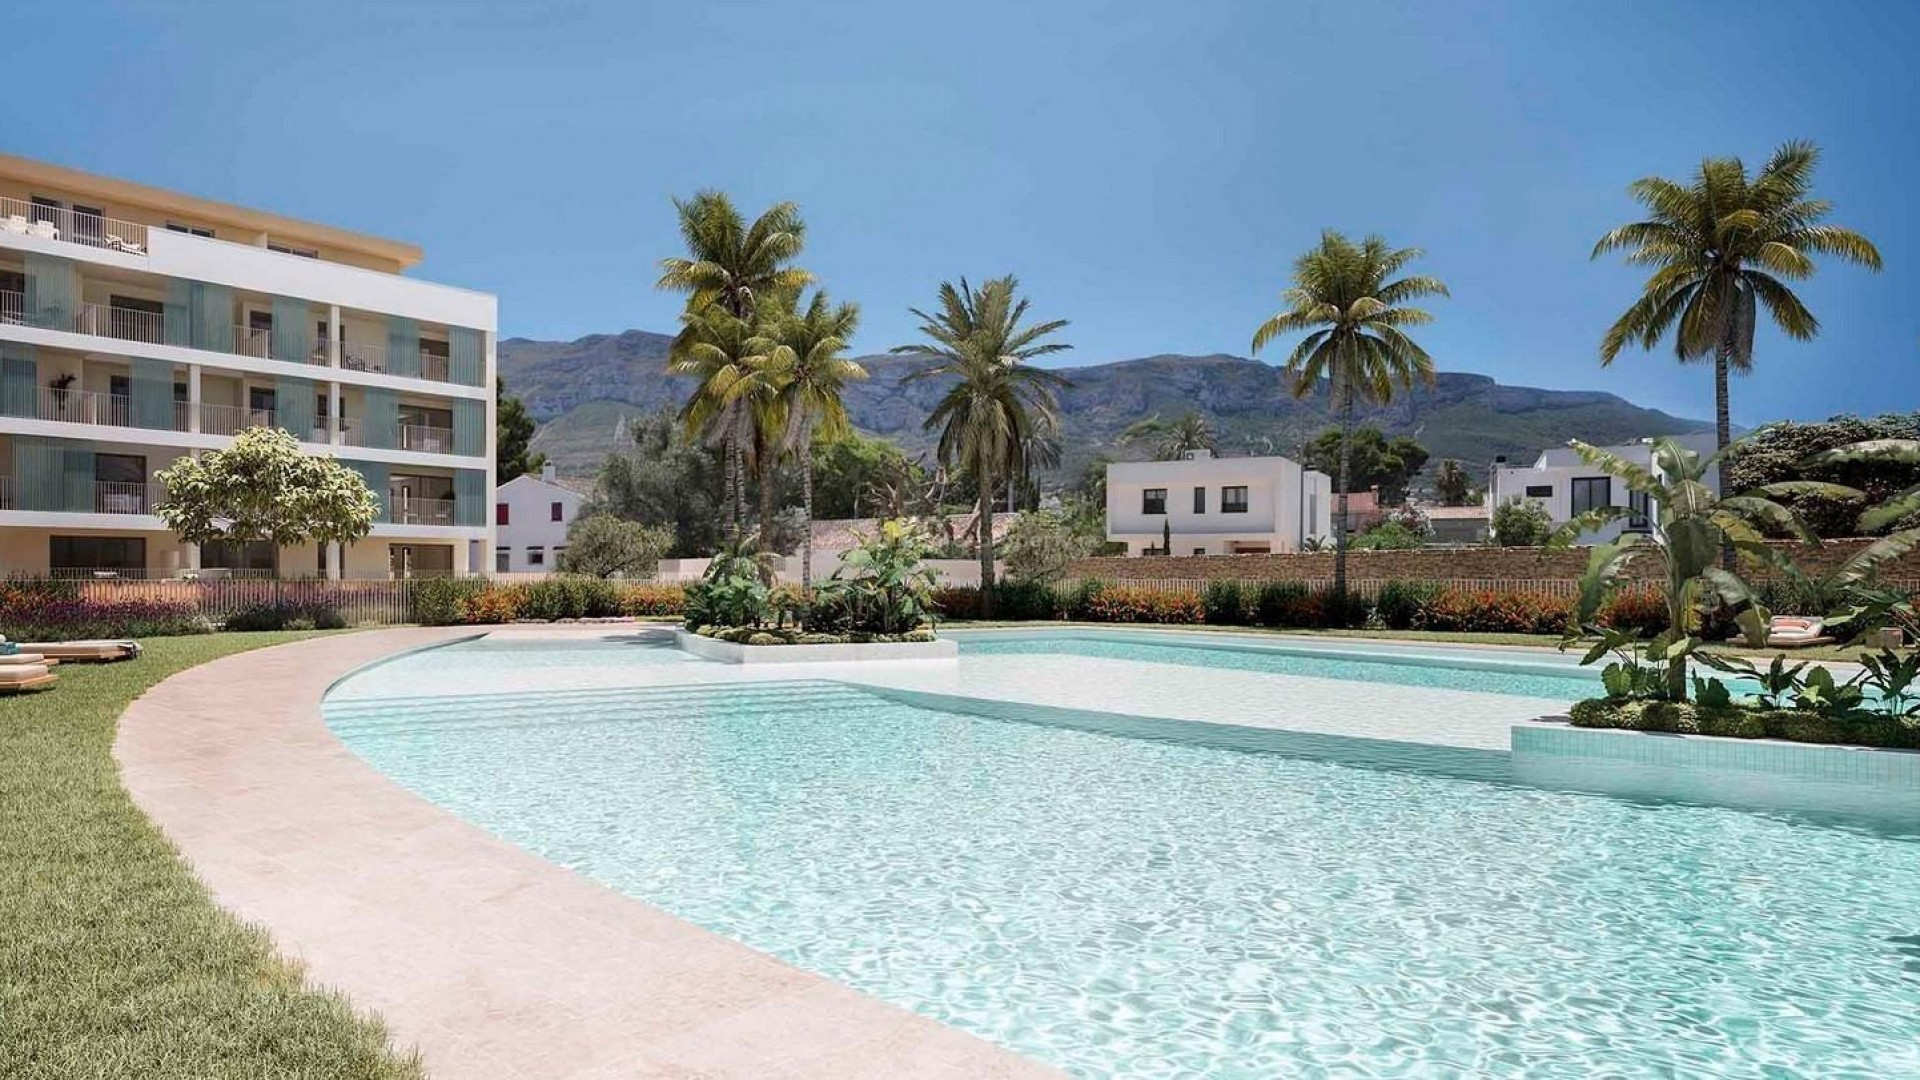 New exclusive residential complex in Denia, 2/3/4 bedrooms, 2 bathrooms, all apartments have a terrace, great communal swimming pool for both adults and children, nice view